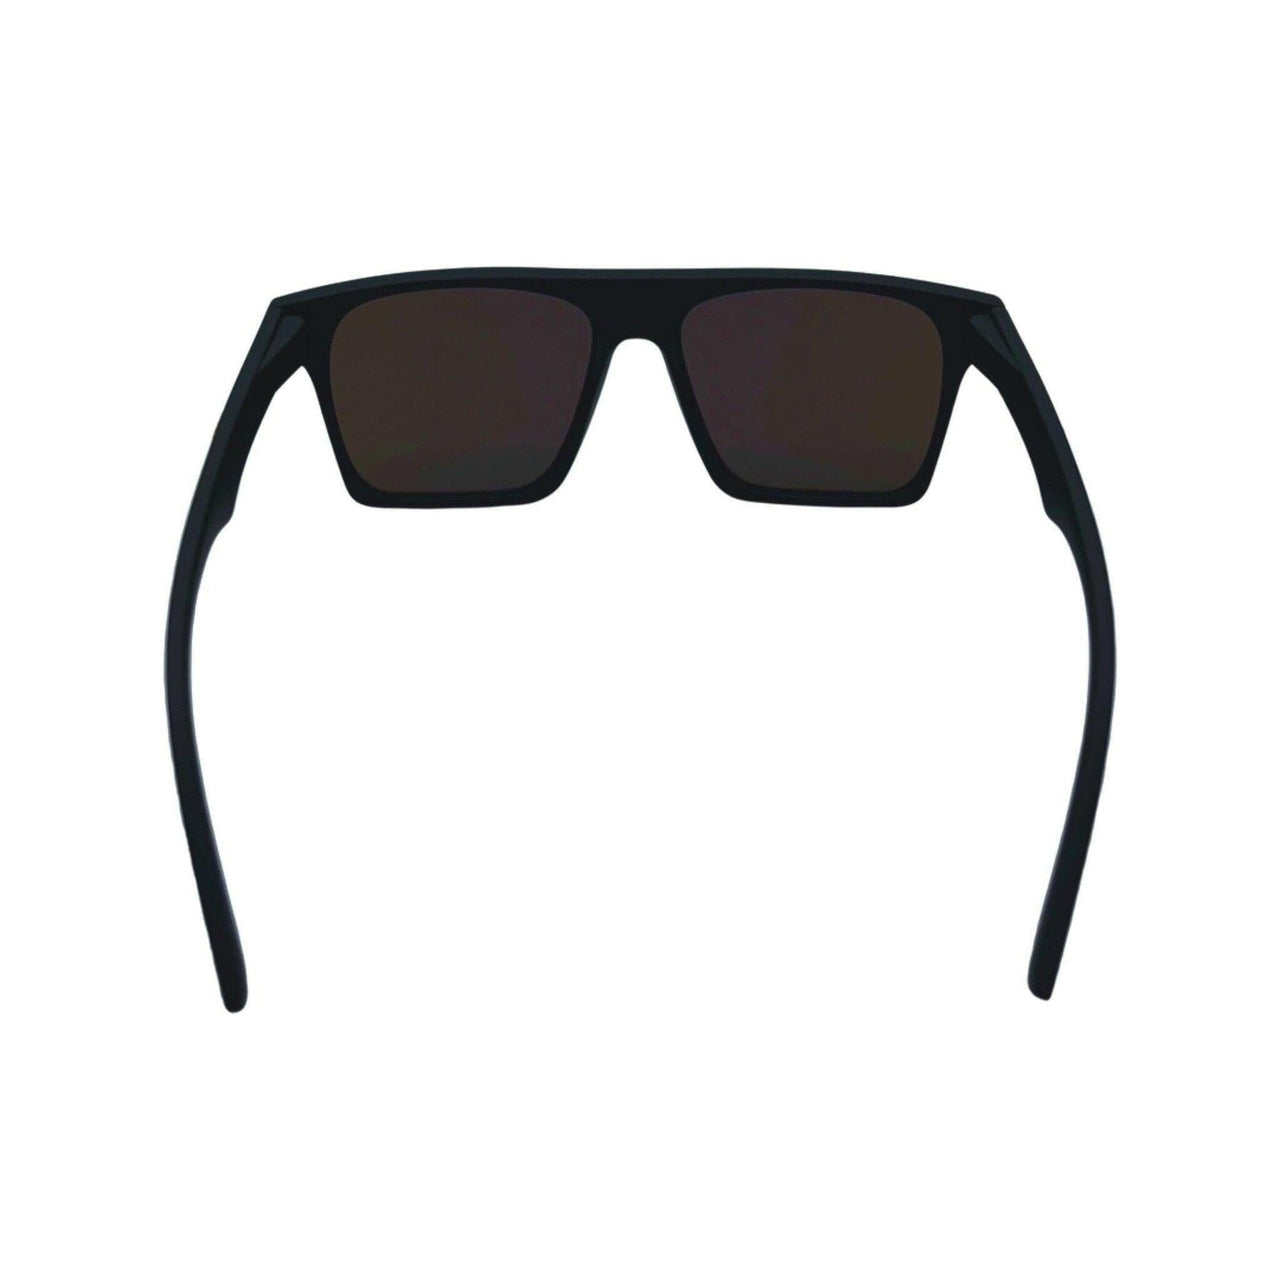 Red Party Shades Polarized Lens Sunglasses